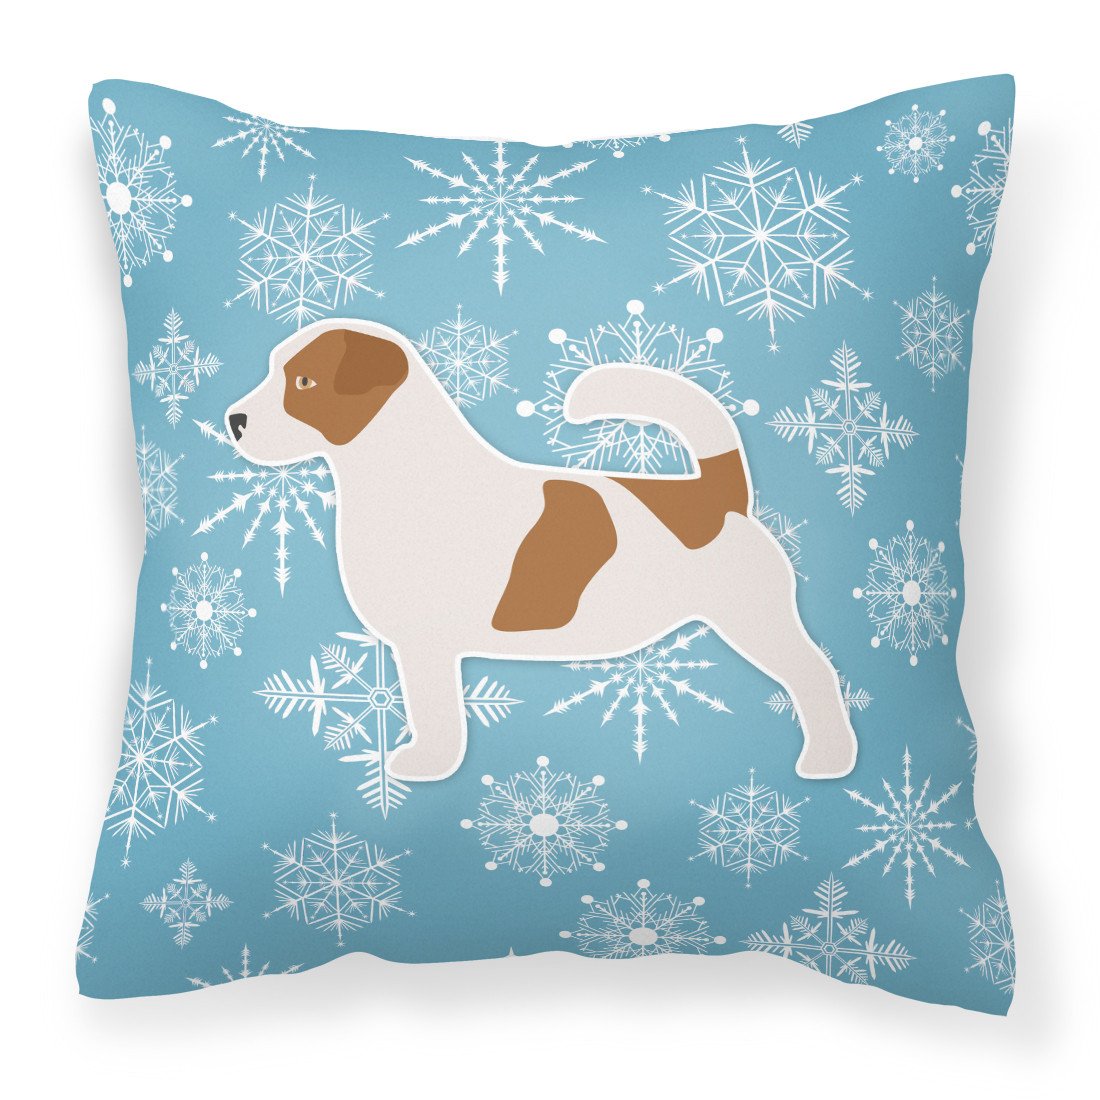 Winter Snowflake Jack Russell Terrier Fabric Decorative Pillow BB3507PW1818 by Caroline's Treasures